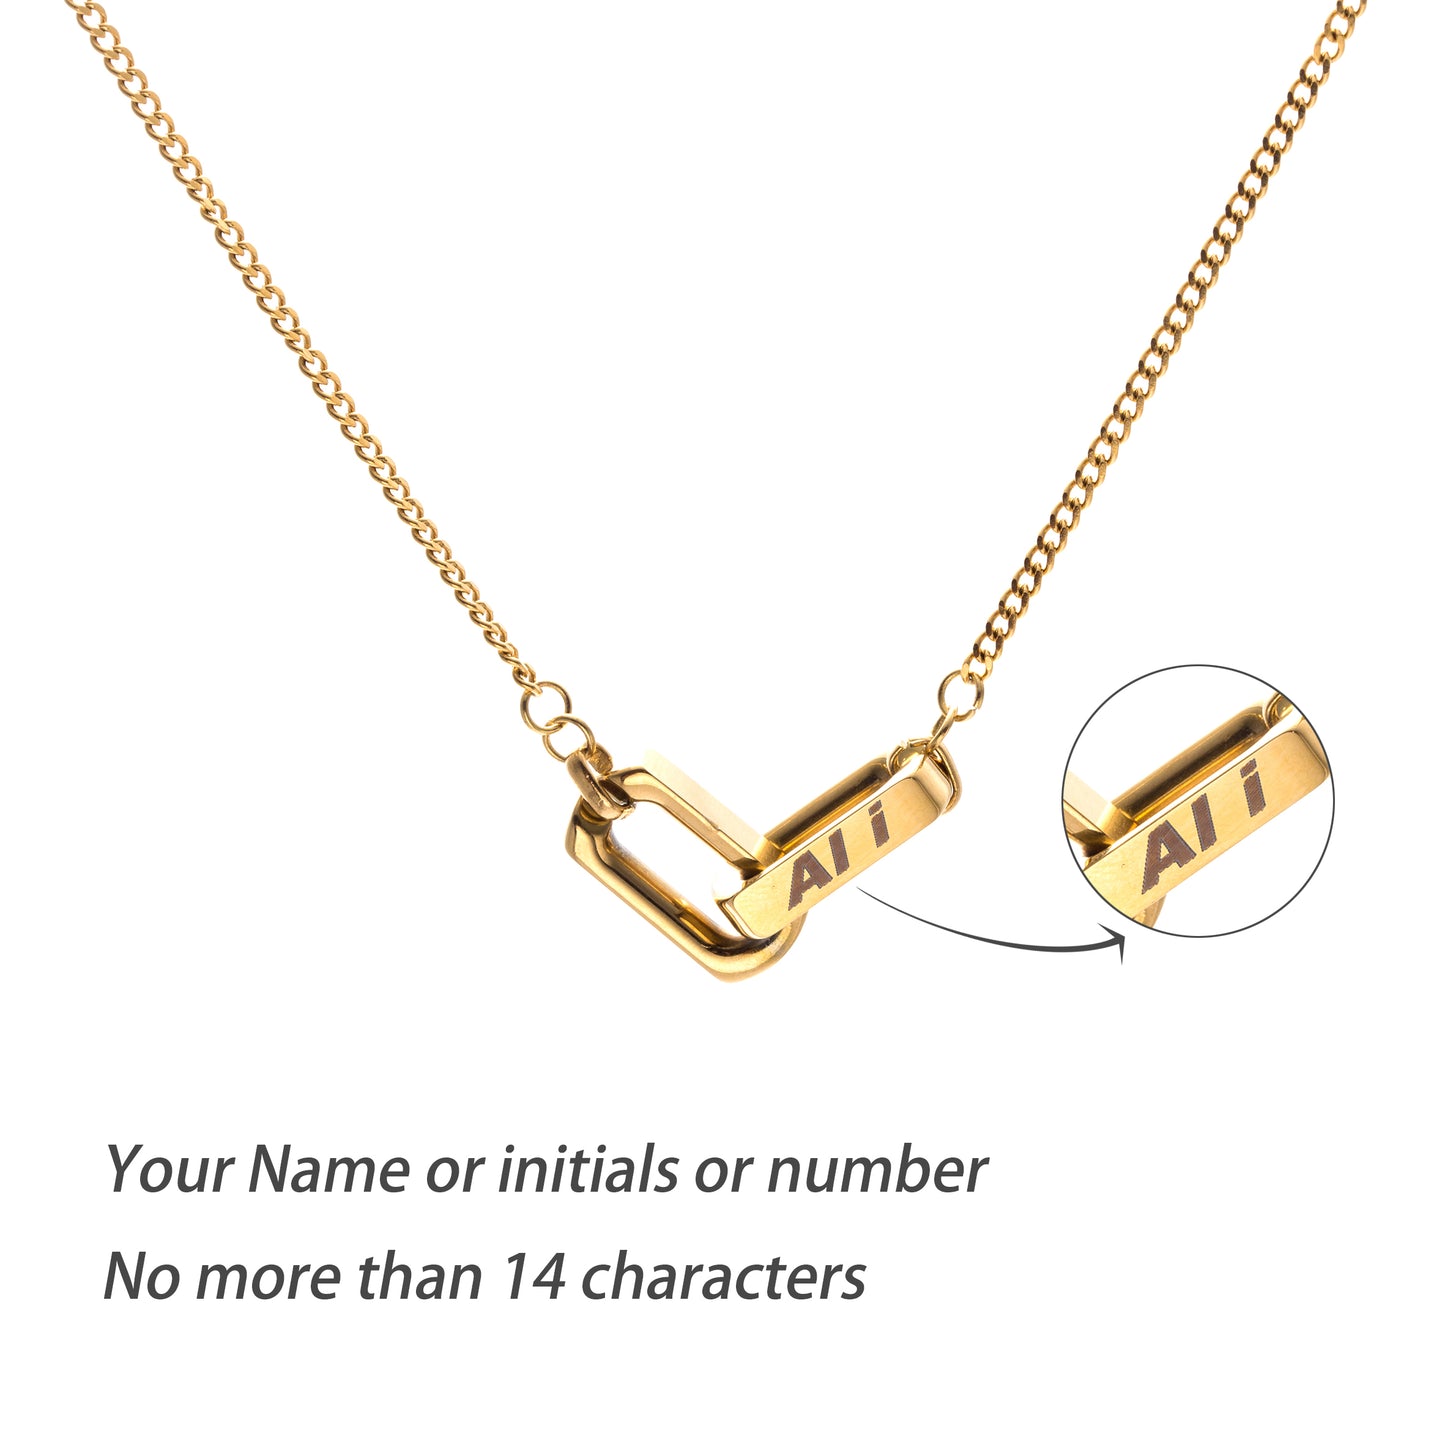 Customizable Your Name 18k gold plated Geometric Interlocking Circles Pendant Necklace For couples 001